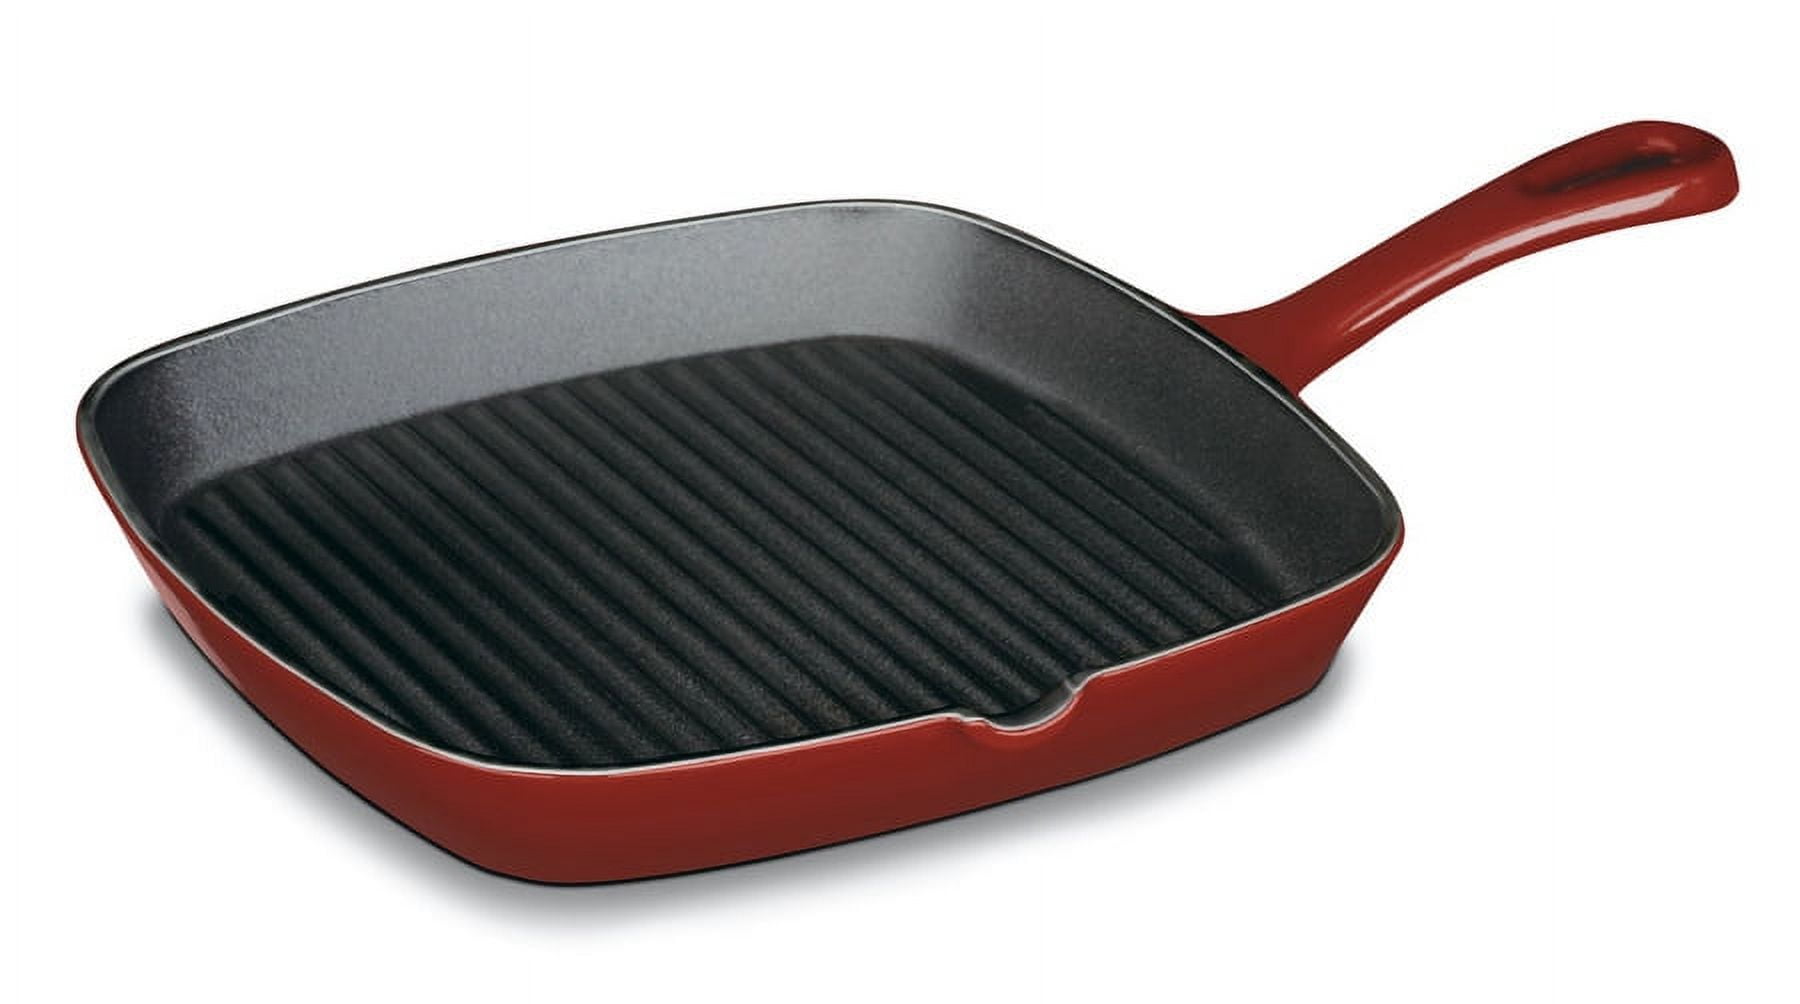 Cuisinart Chef's Classic Enameled Cast Iron 10-Inch Round Fry Pan, Cardinal  Red